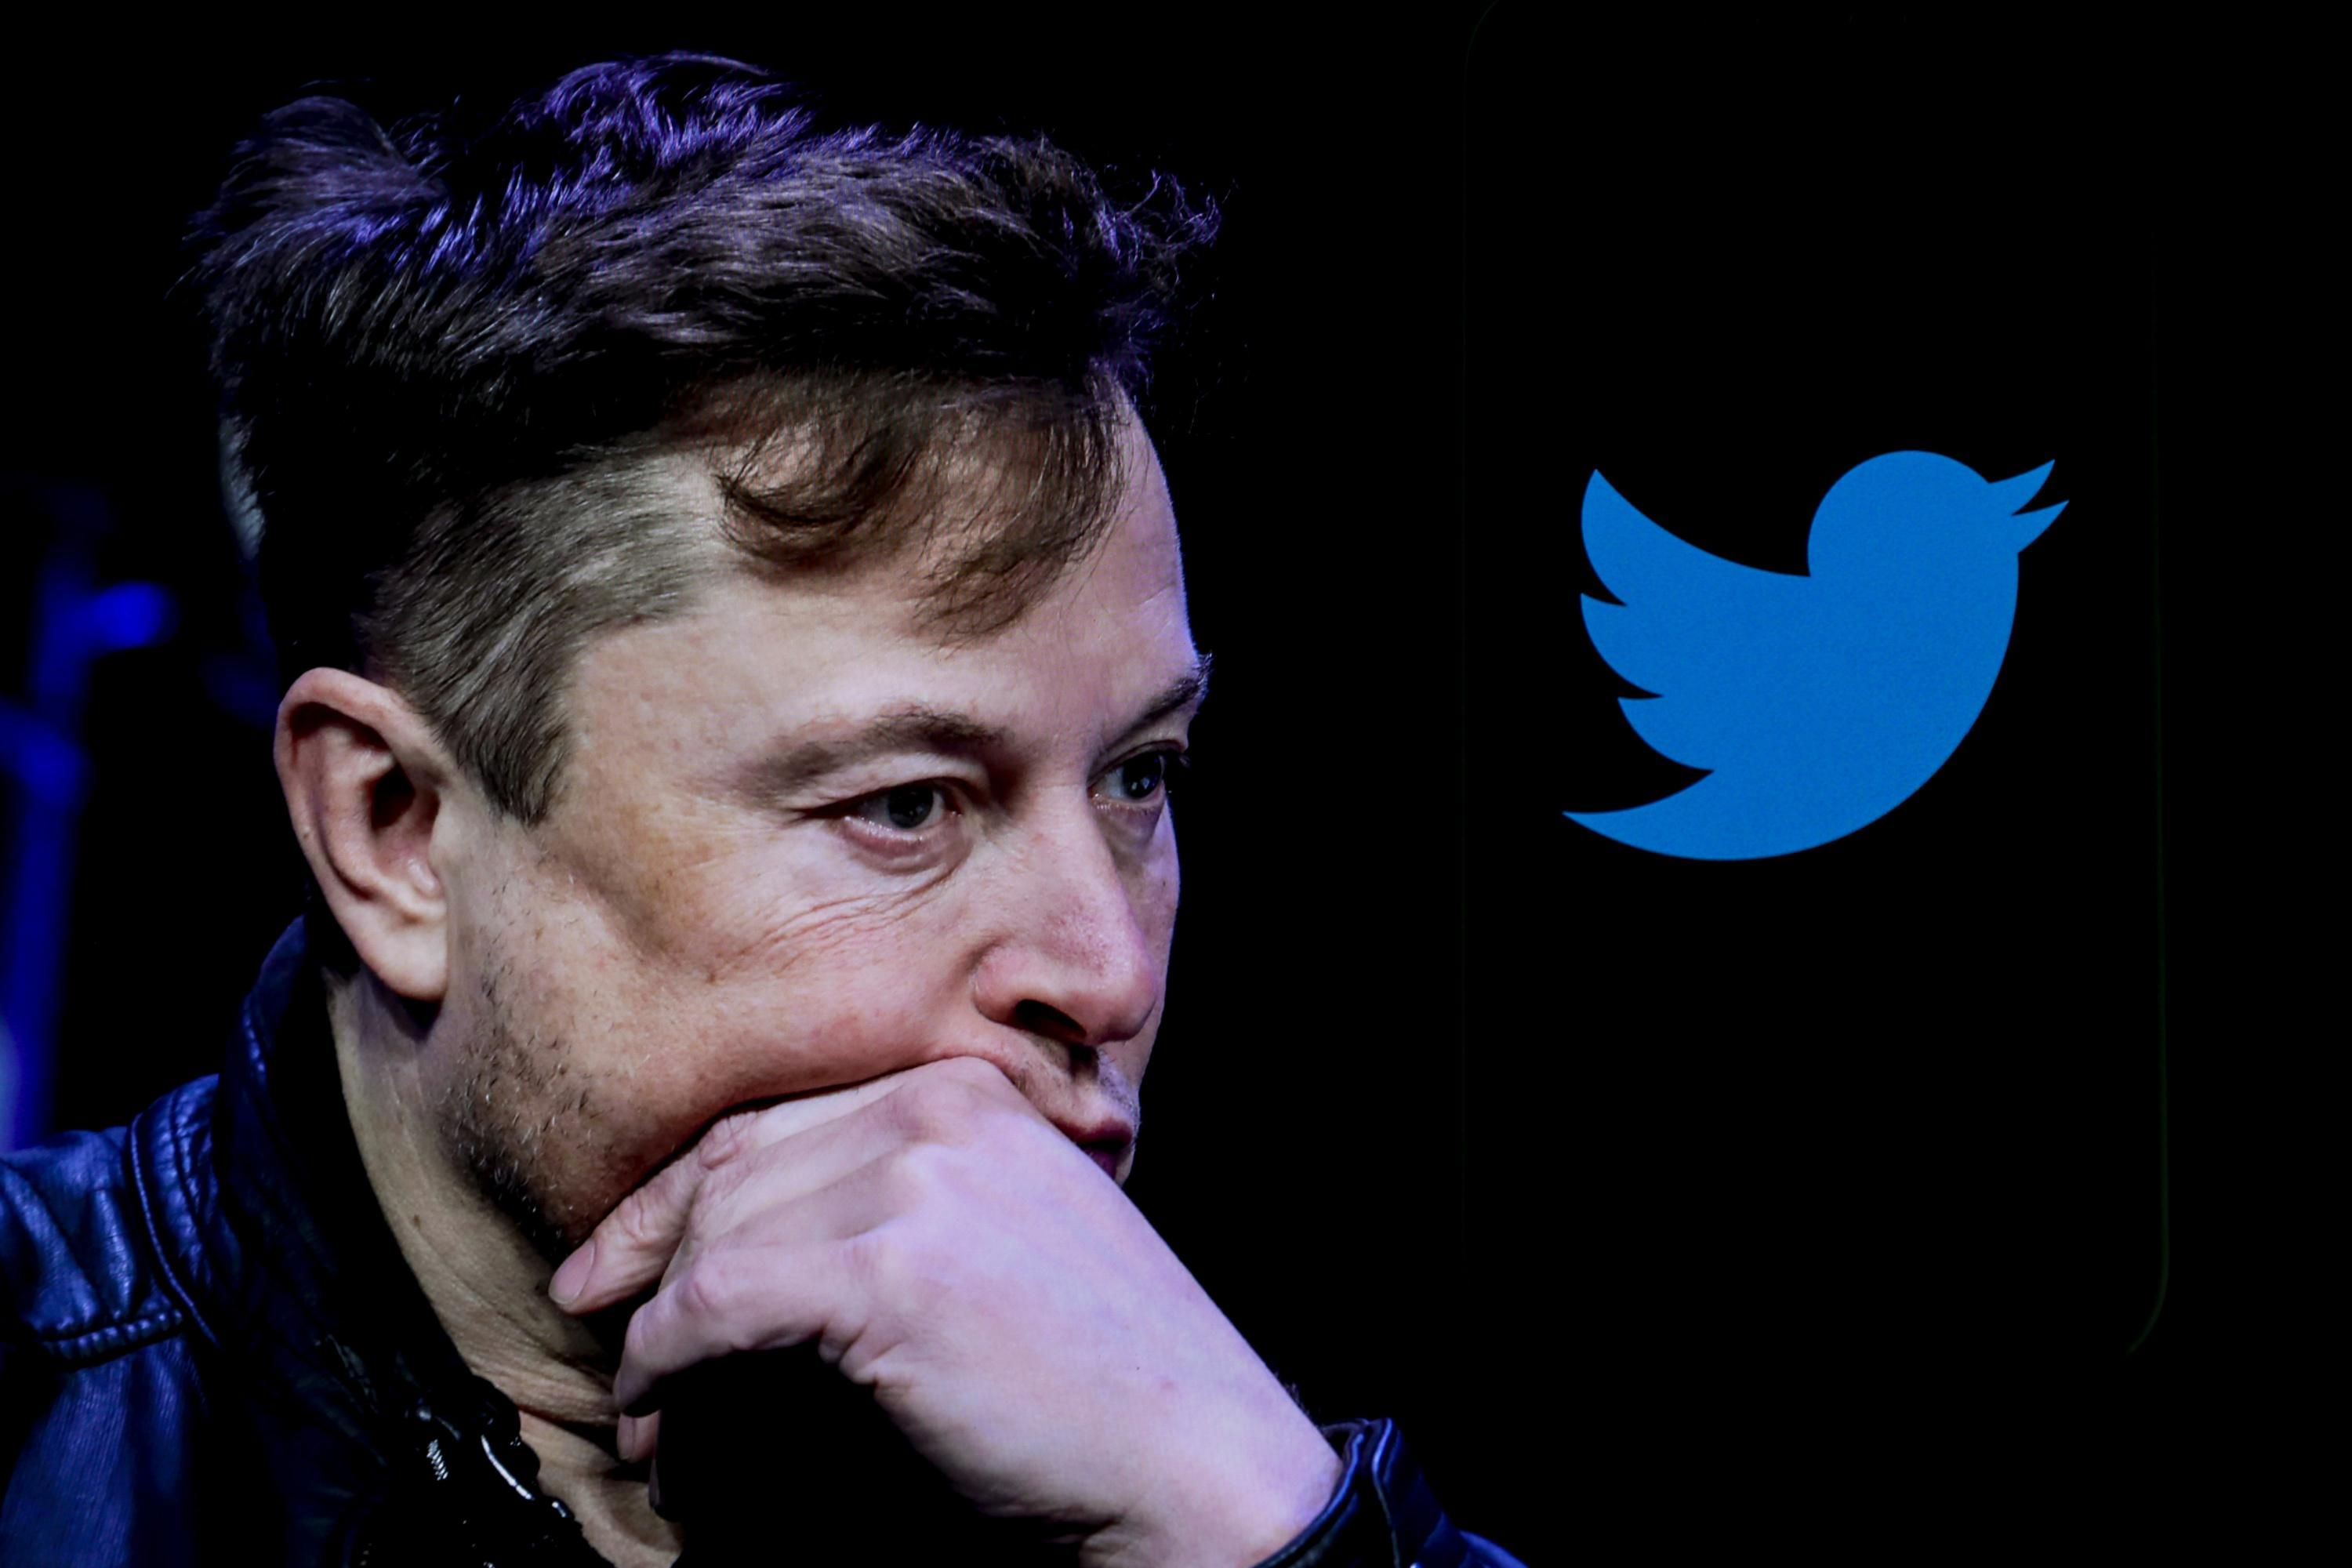 Elon Musk is displayed next to Twitter's logo